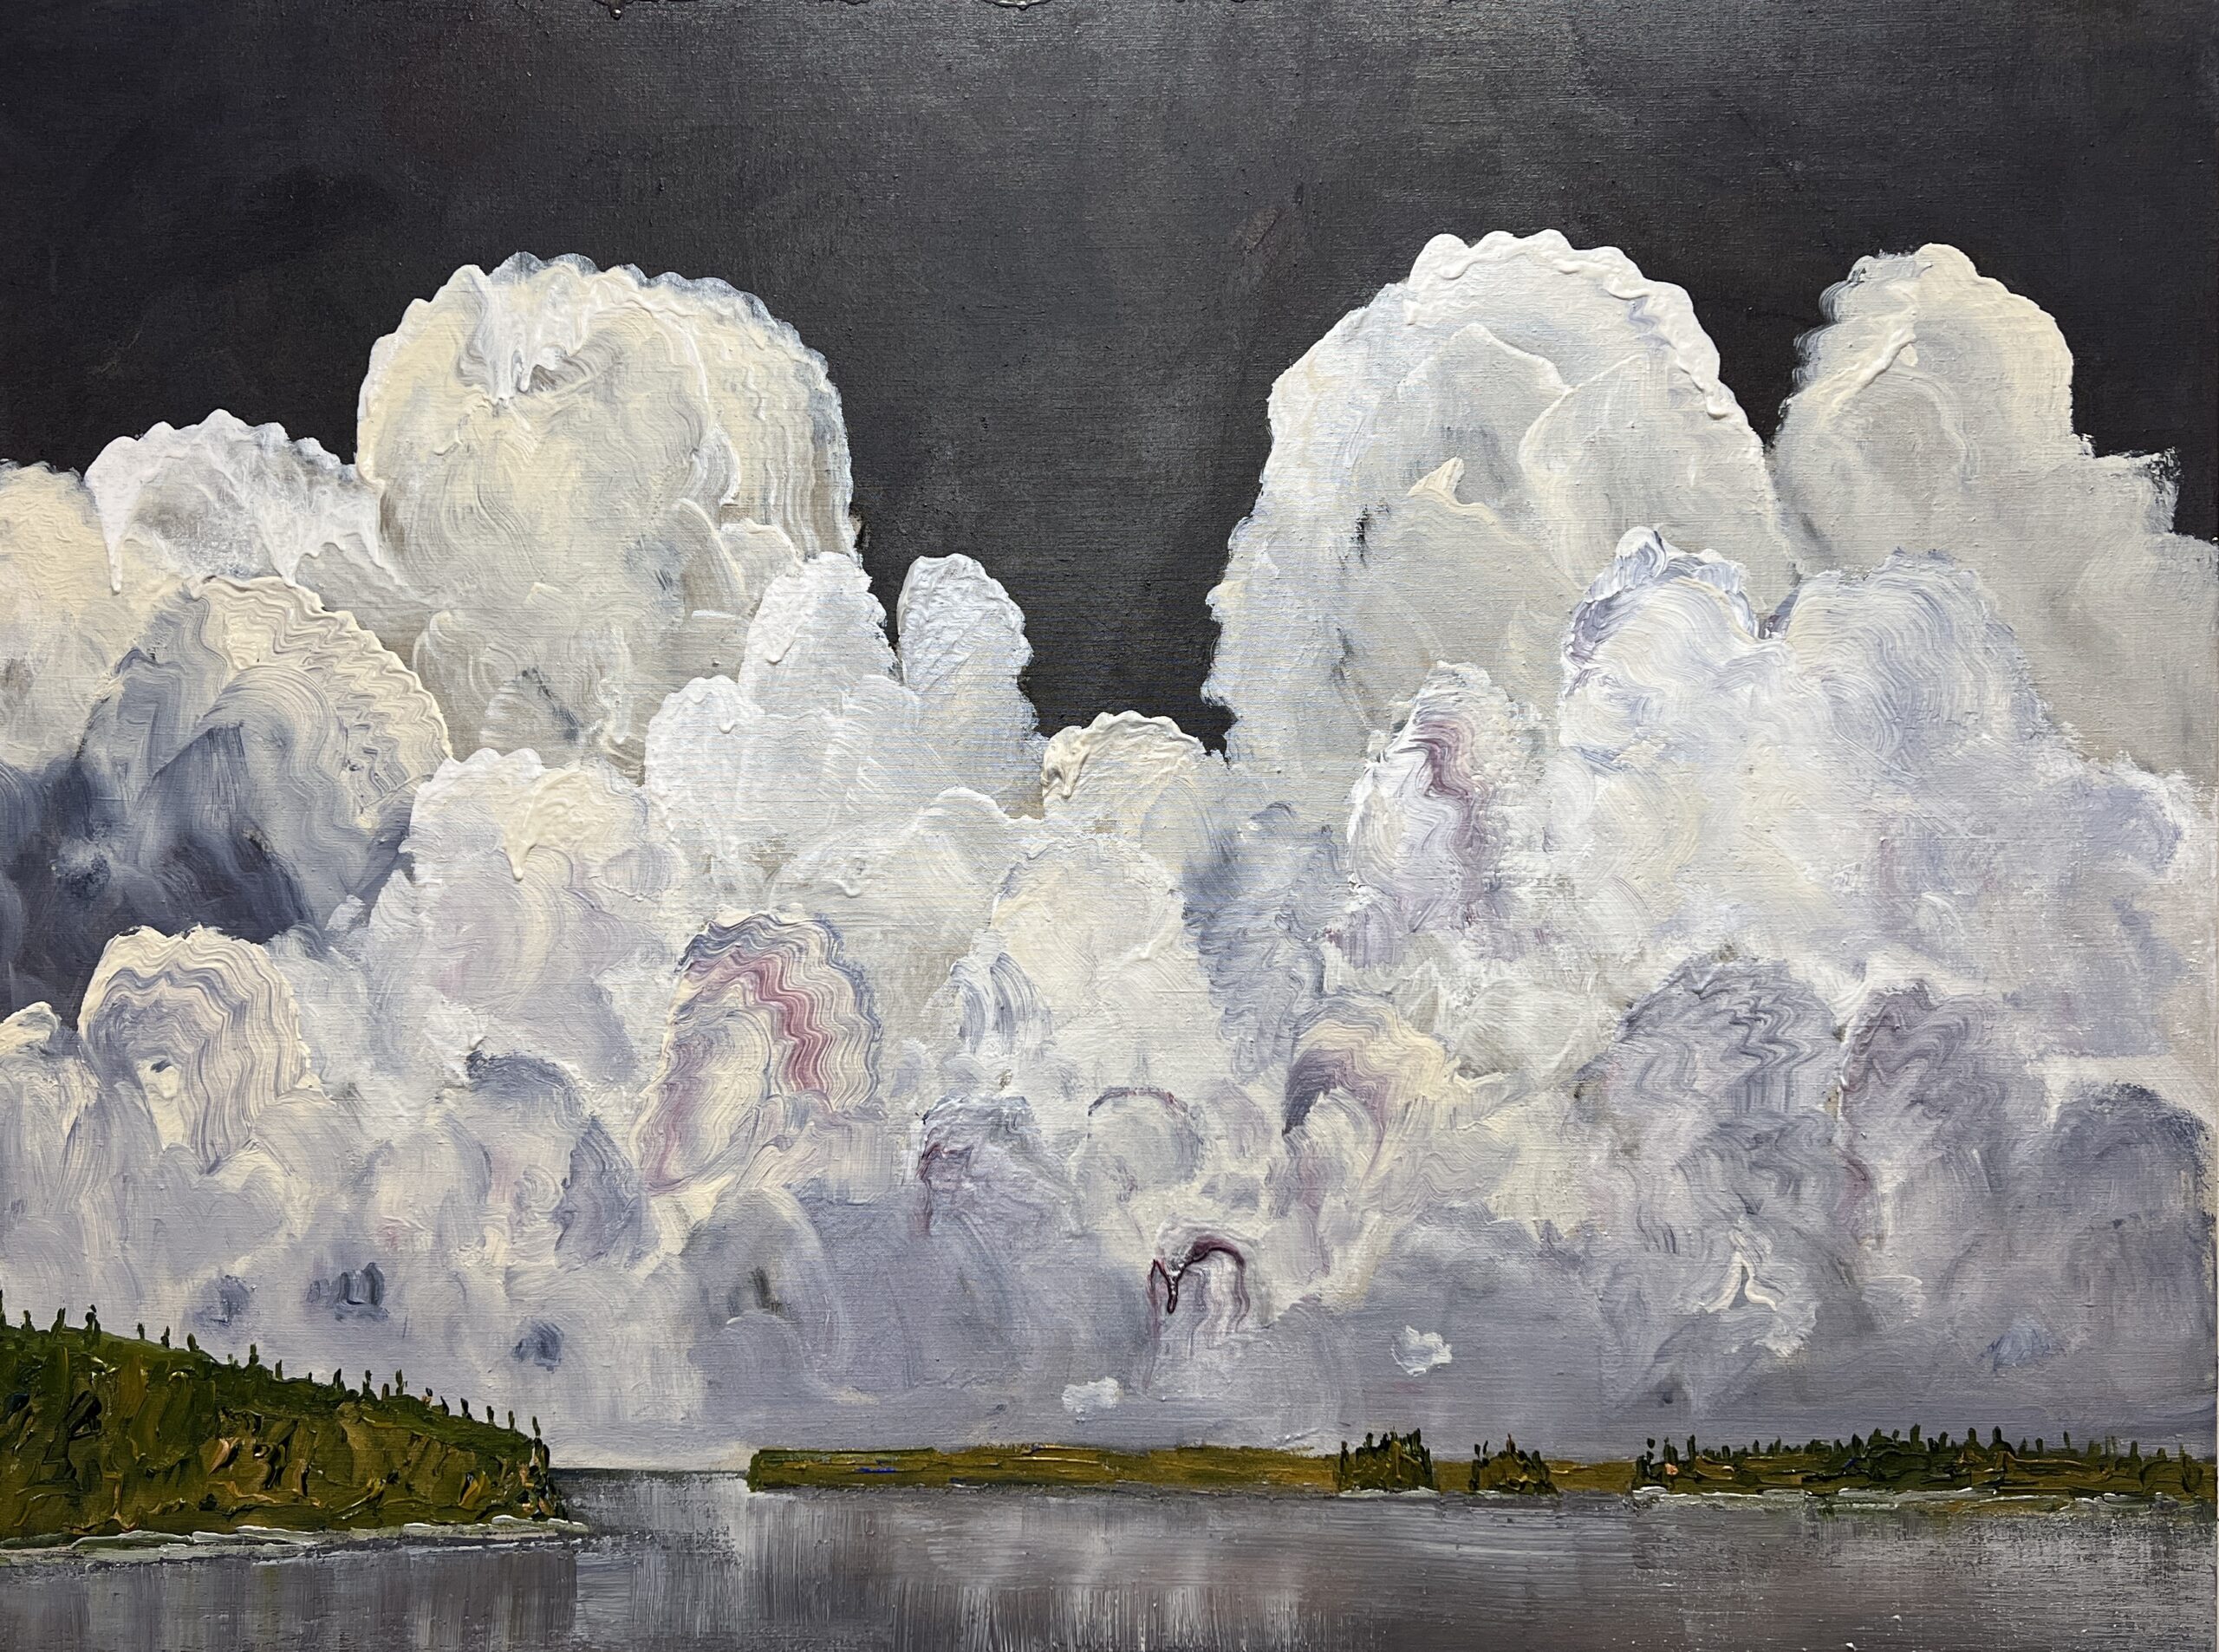 Glowing White Clouds 2022 acrylic on linen 36 x 48 copy